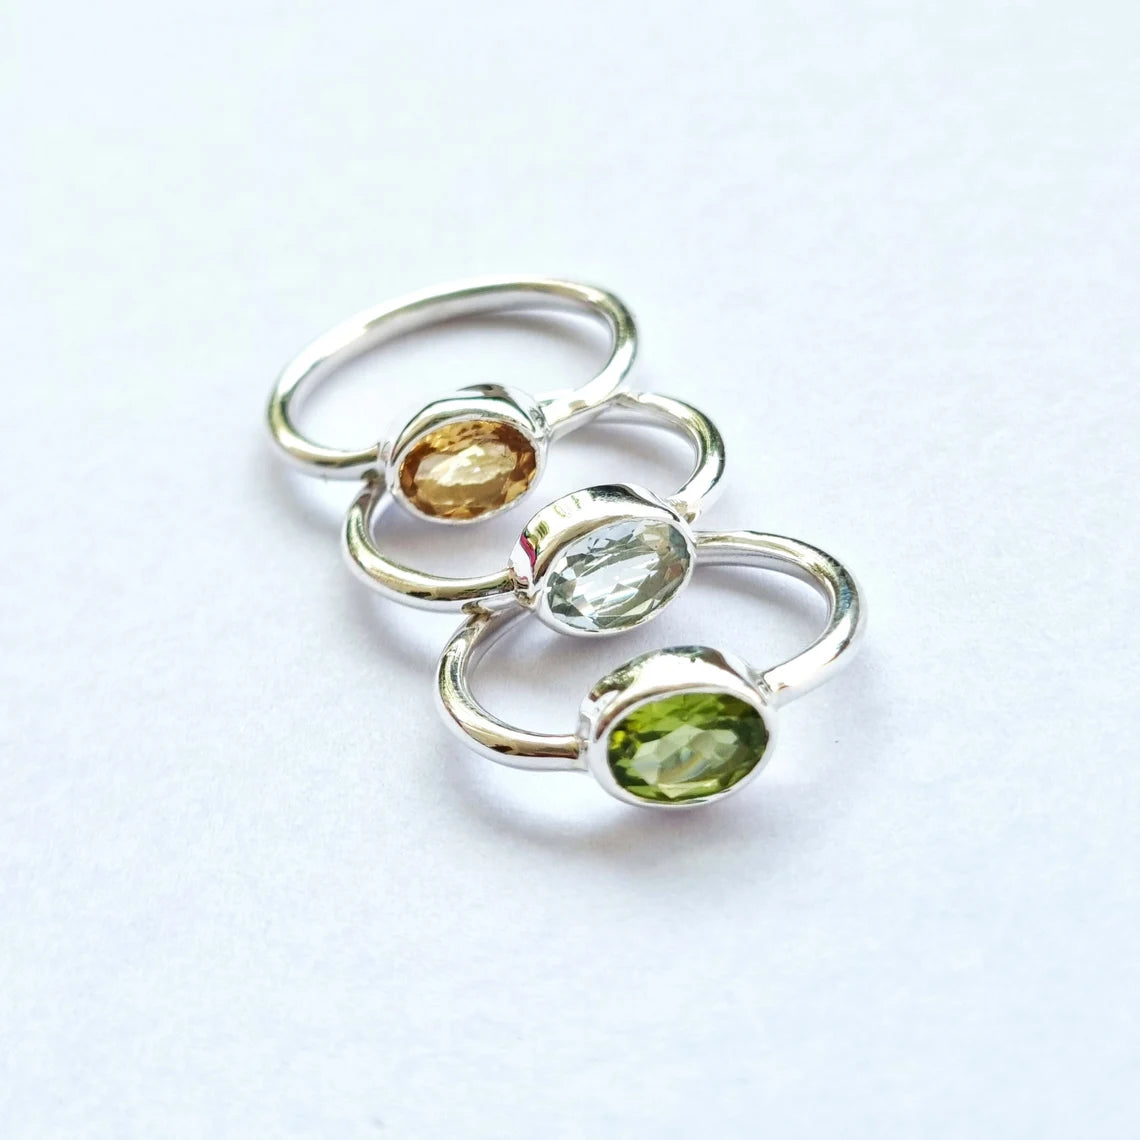 Oval Green Peridot Ring, Natural Citrine Silver Ring, Blue Topaz Gemstone Ring, August Birthday Gift for Her, Green Solitaire Gemstone Ring